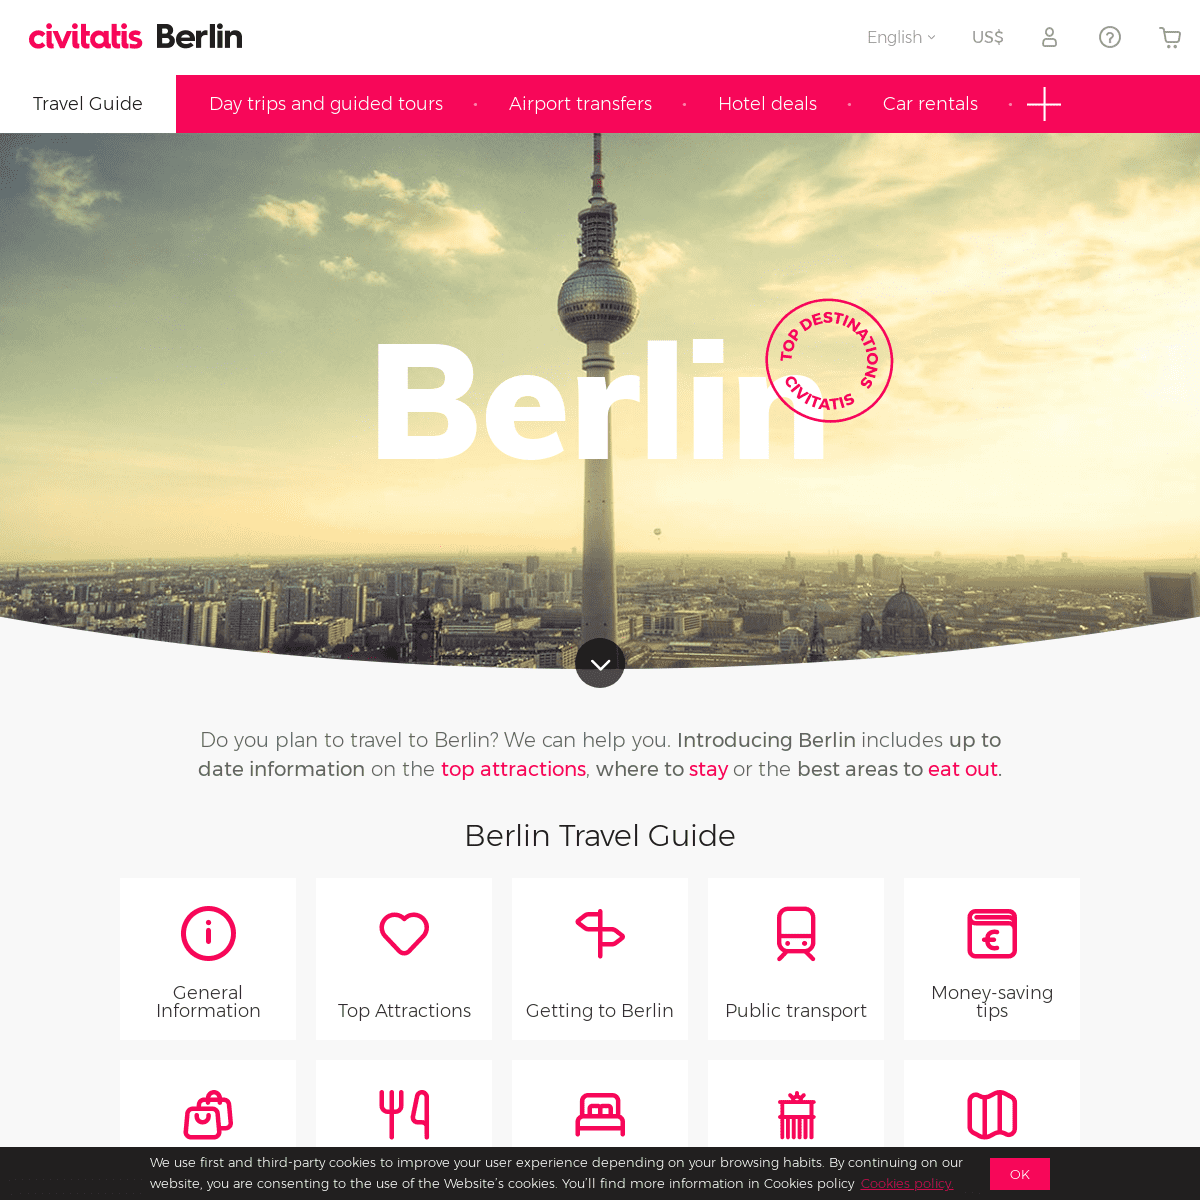 Berlin Tourism and Travel Guide - Berlin City Guide